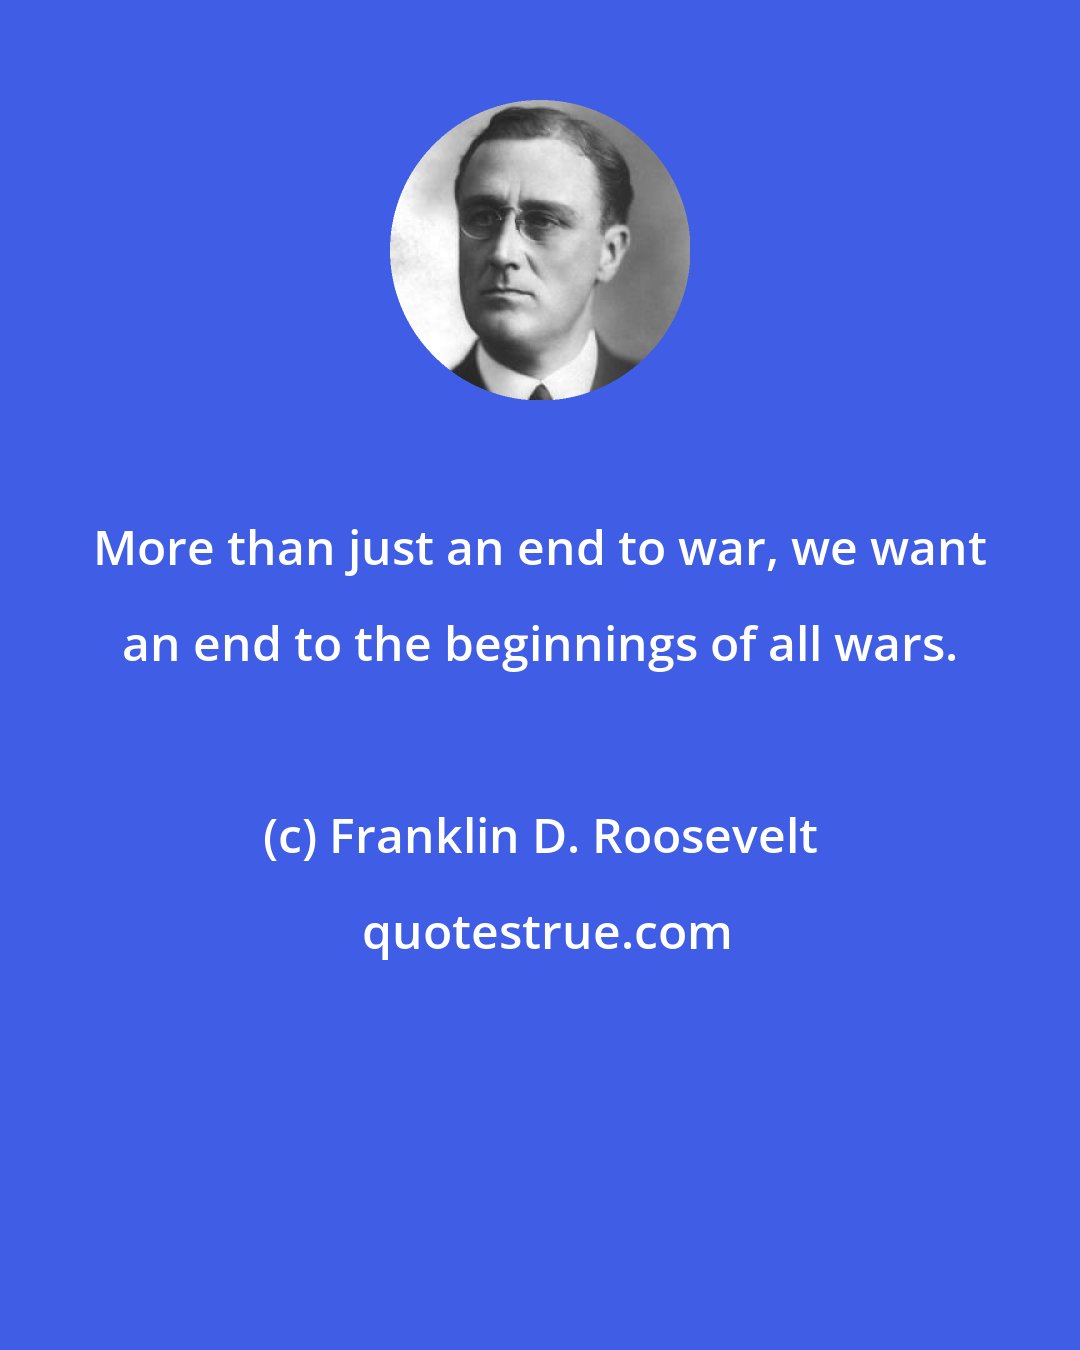 Franklin D. Roosevelt: More than just an end to war, we want an end to the beginnings of all wars.